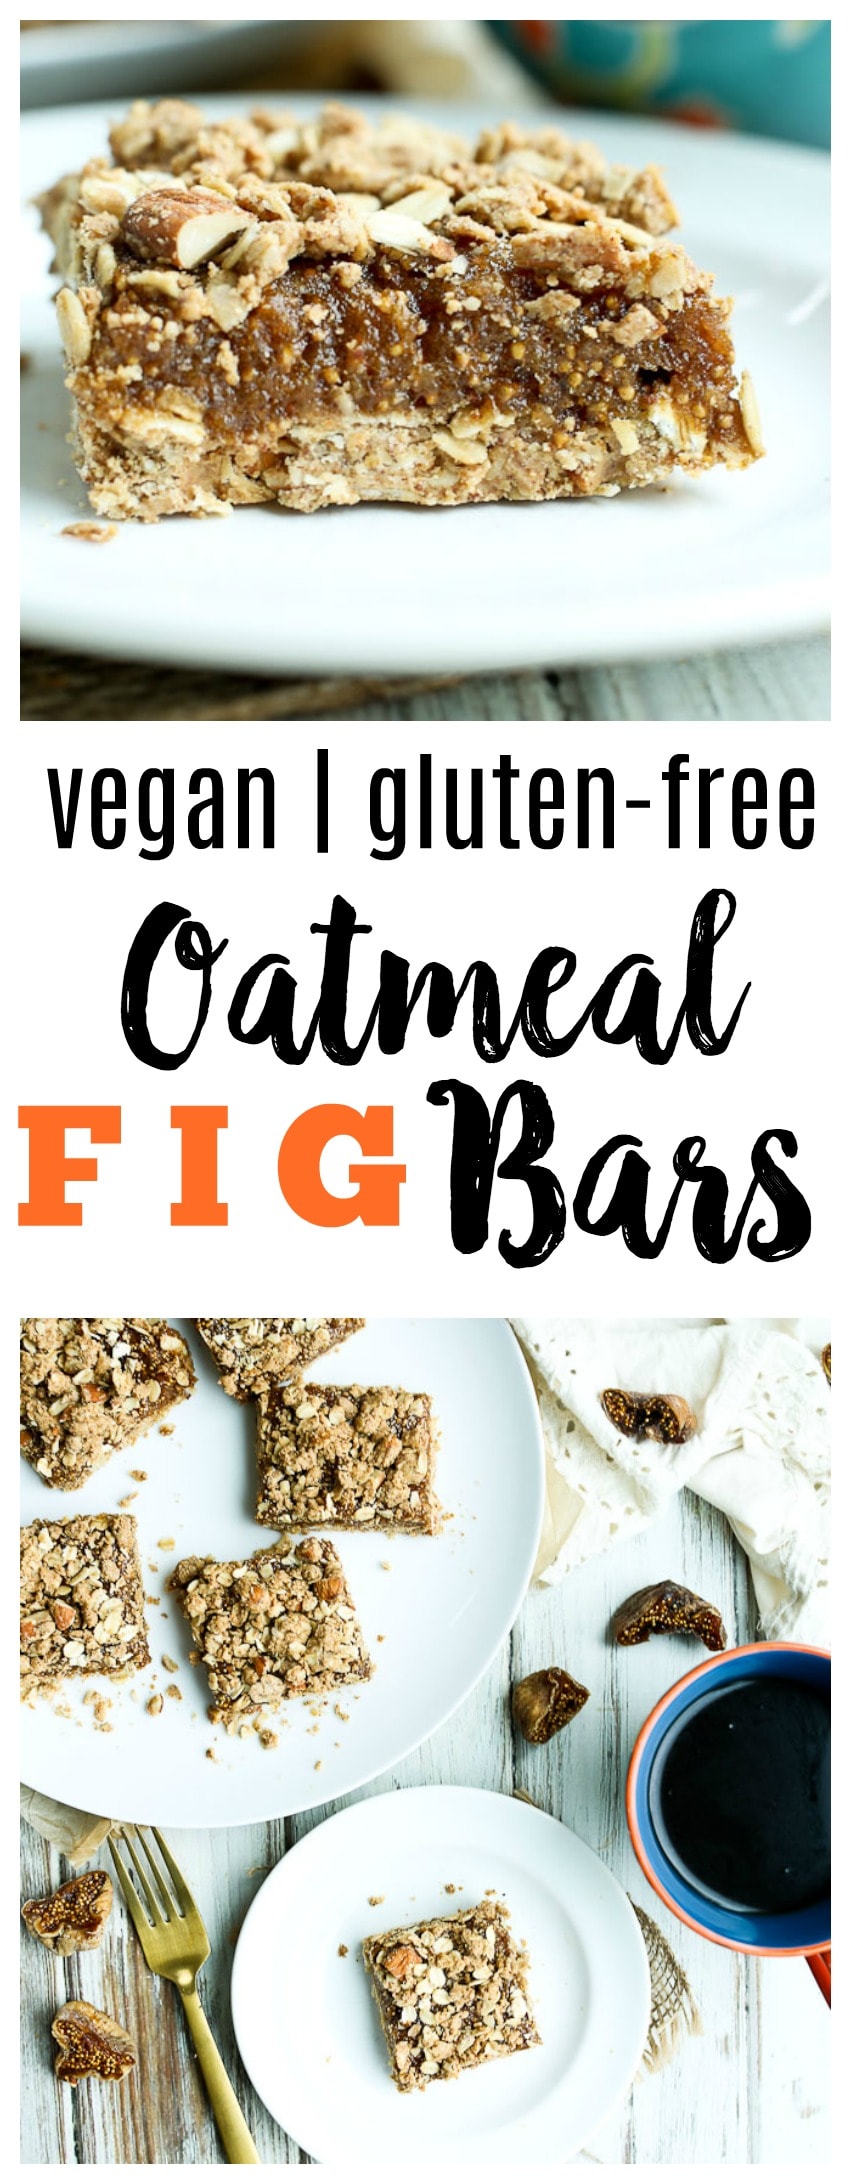 Oatmeal Fig Bars Recipe. gluten-free and vegan healthy recipe great for breakfast snack or dessert